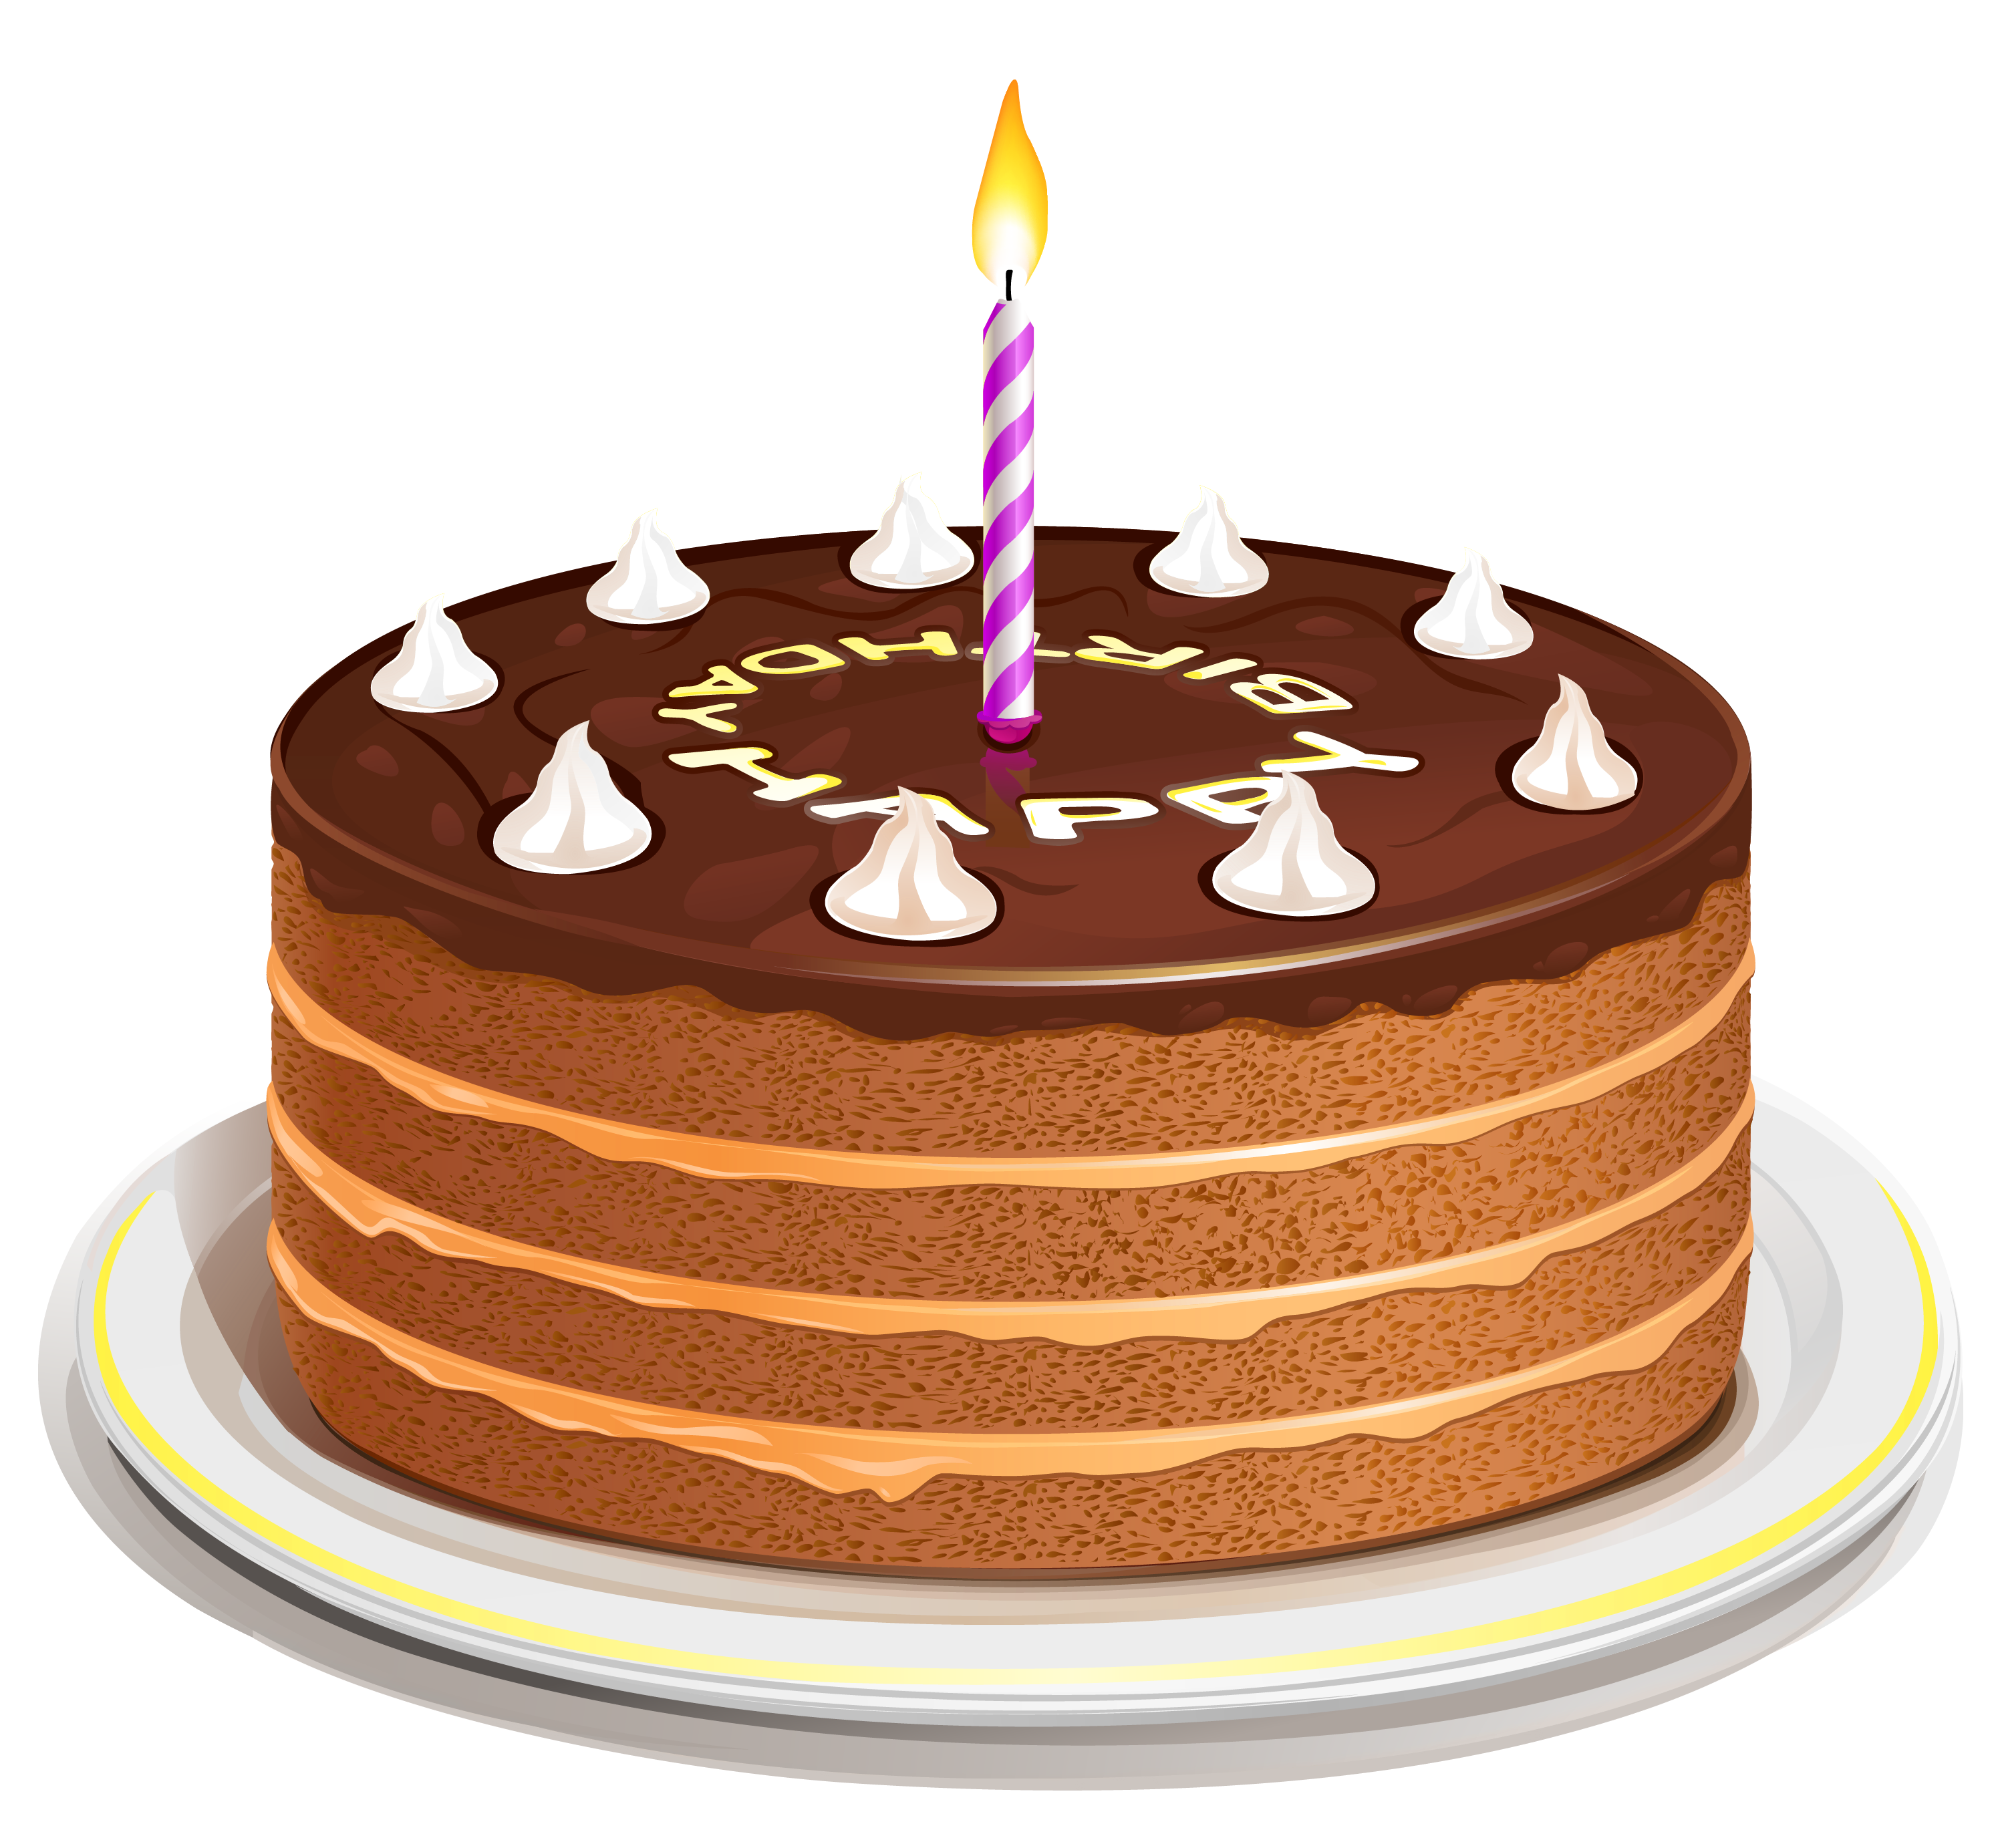 Happy Birthday Cake Png, Transparent Png - 5932x8000(#592738) - PngFind